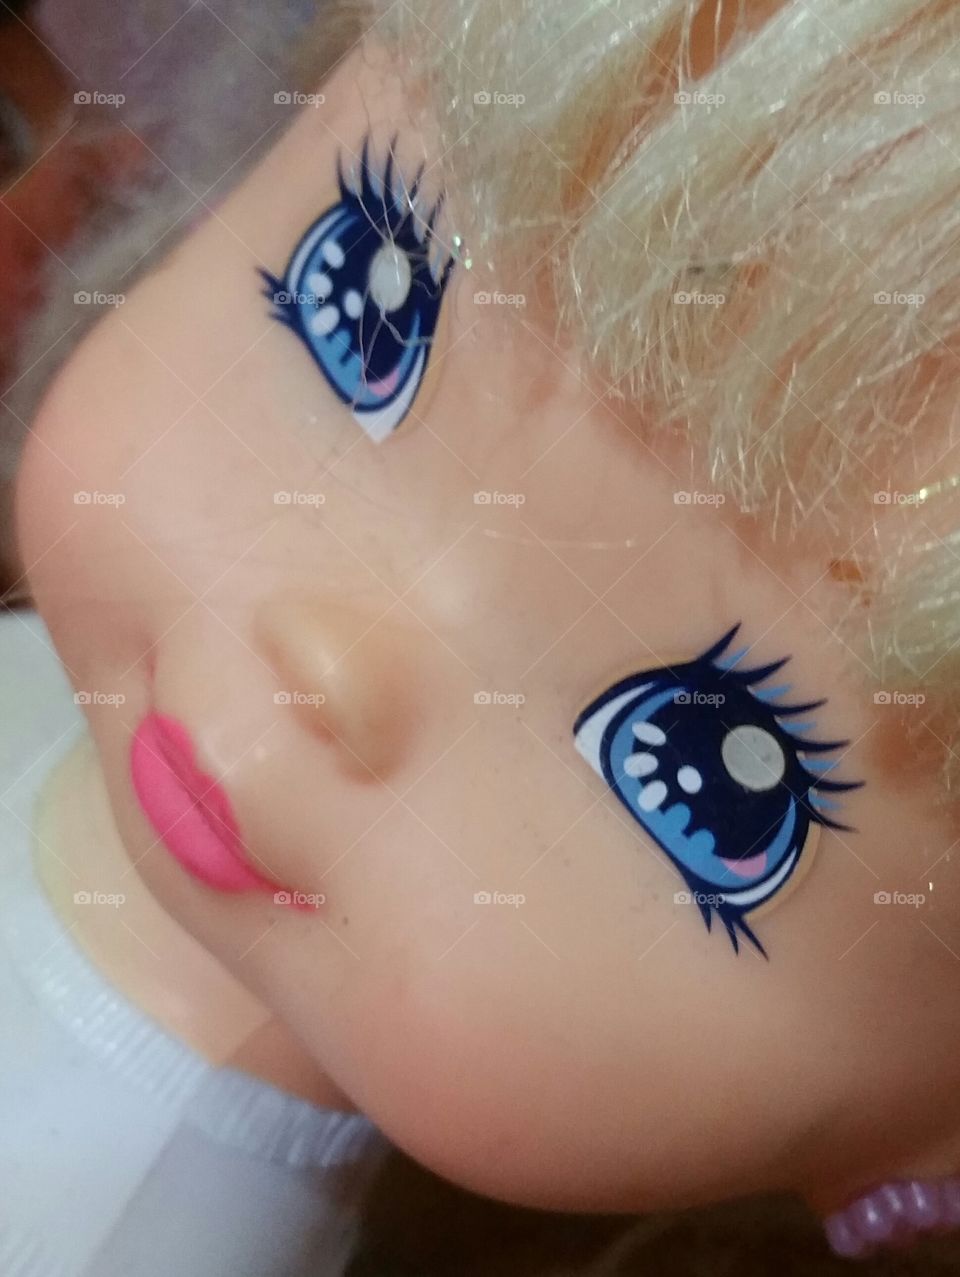 Closeup of a blue eyed doll face